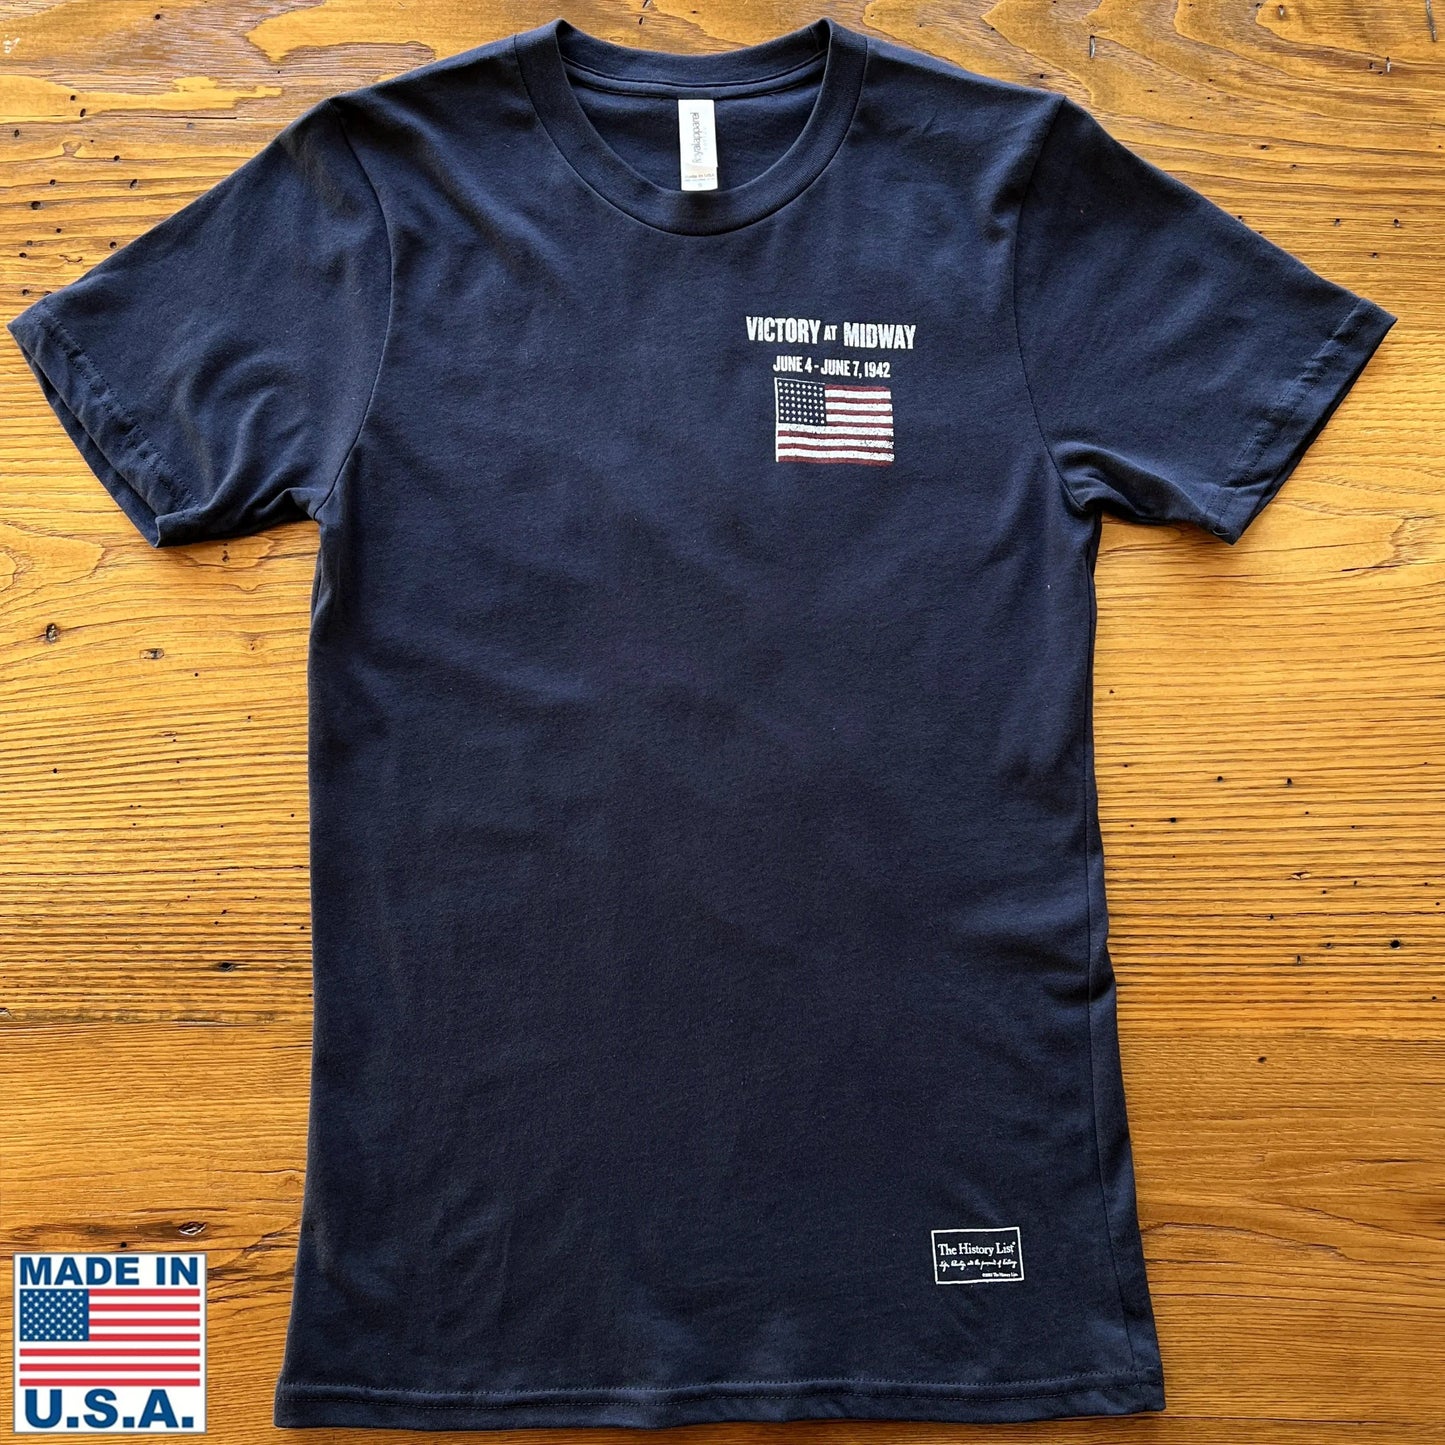 Front of "Victory at Midway" Shirt from The History List store